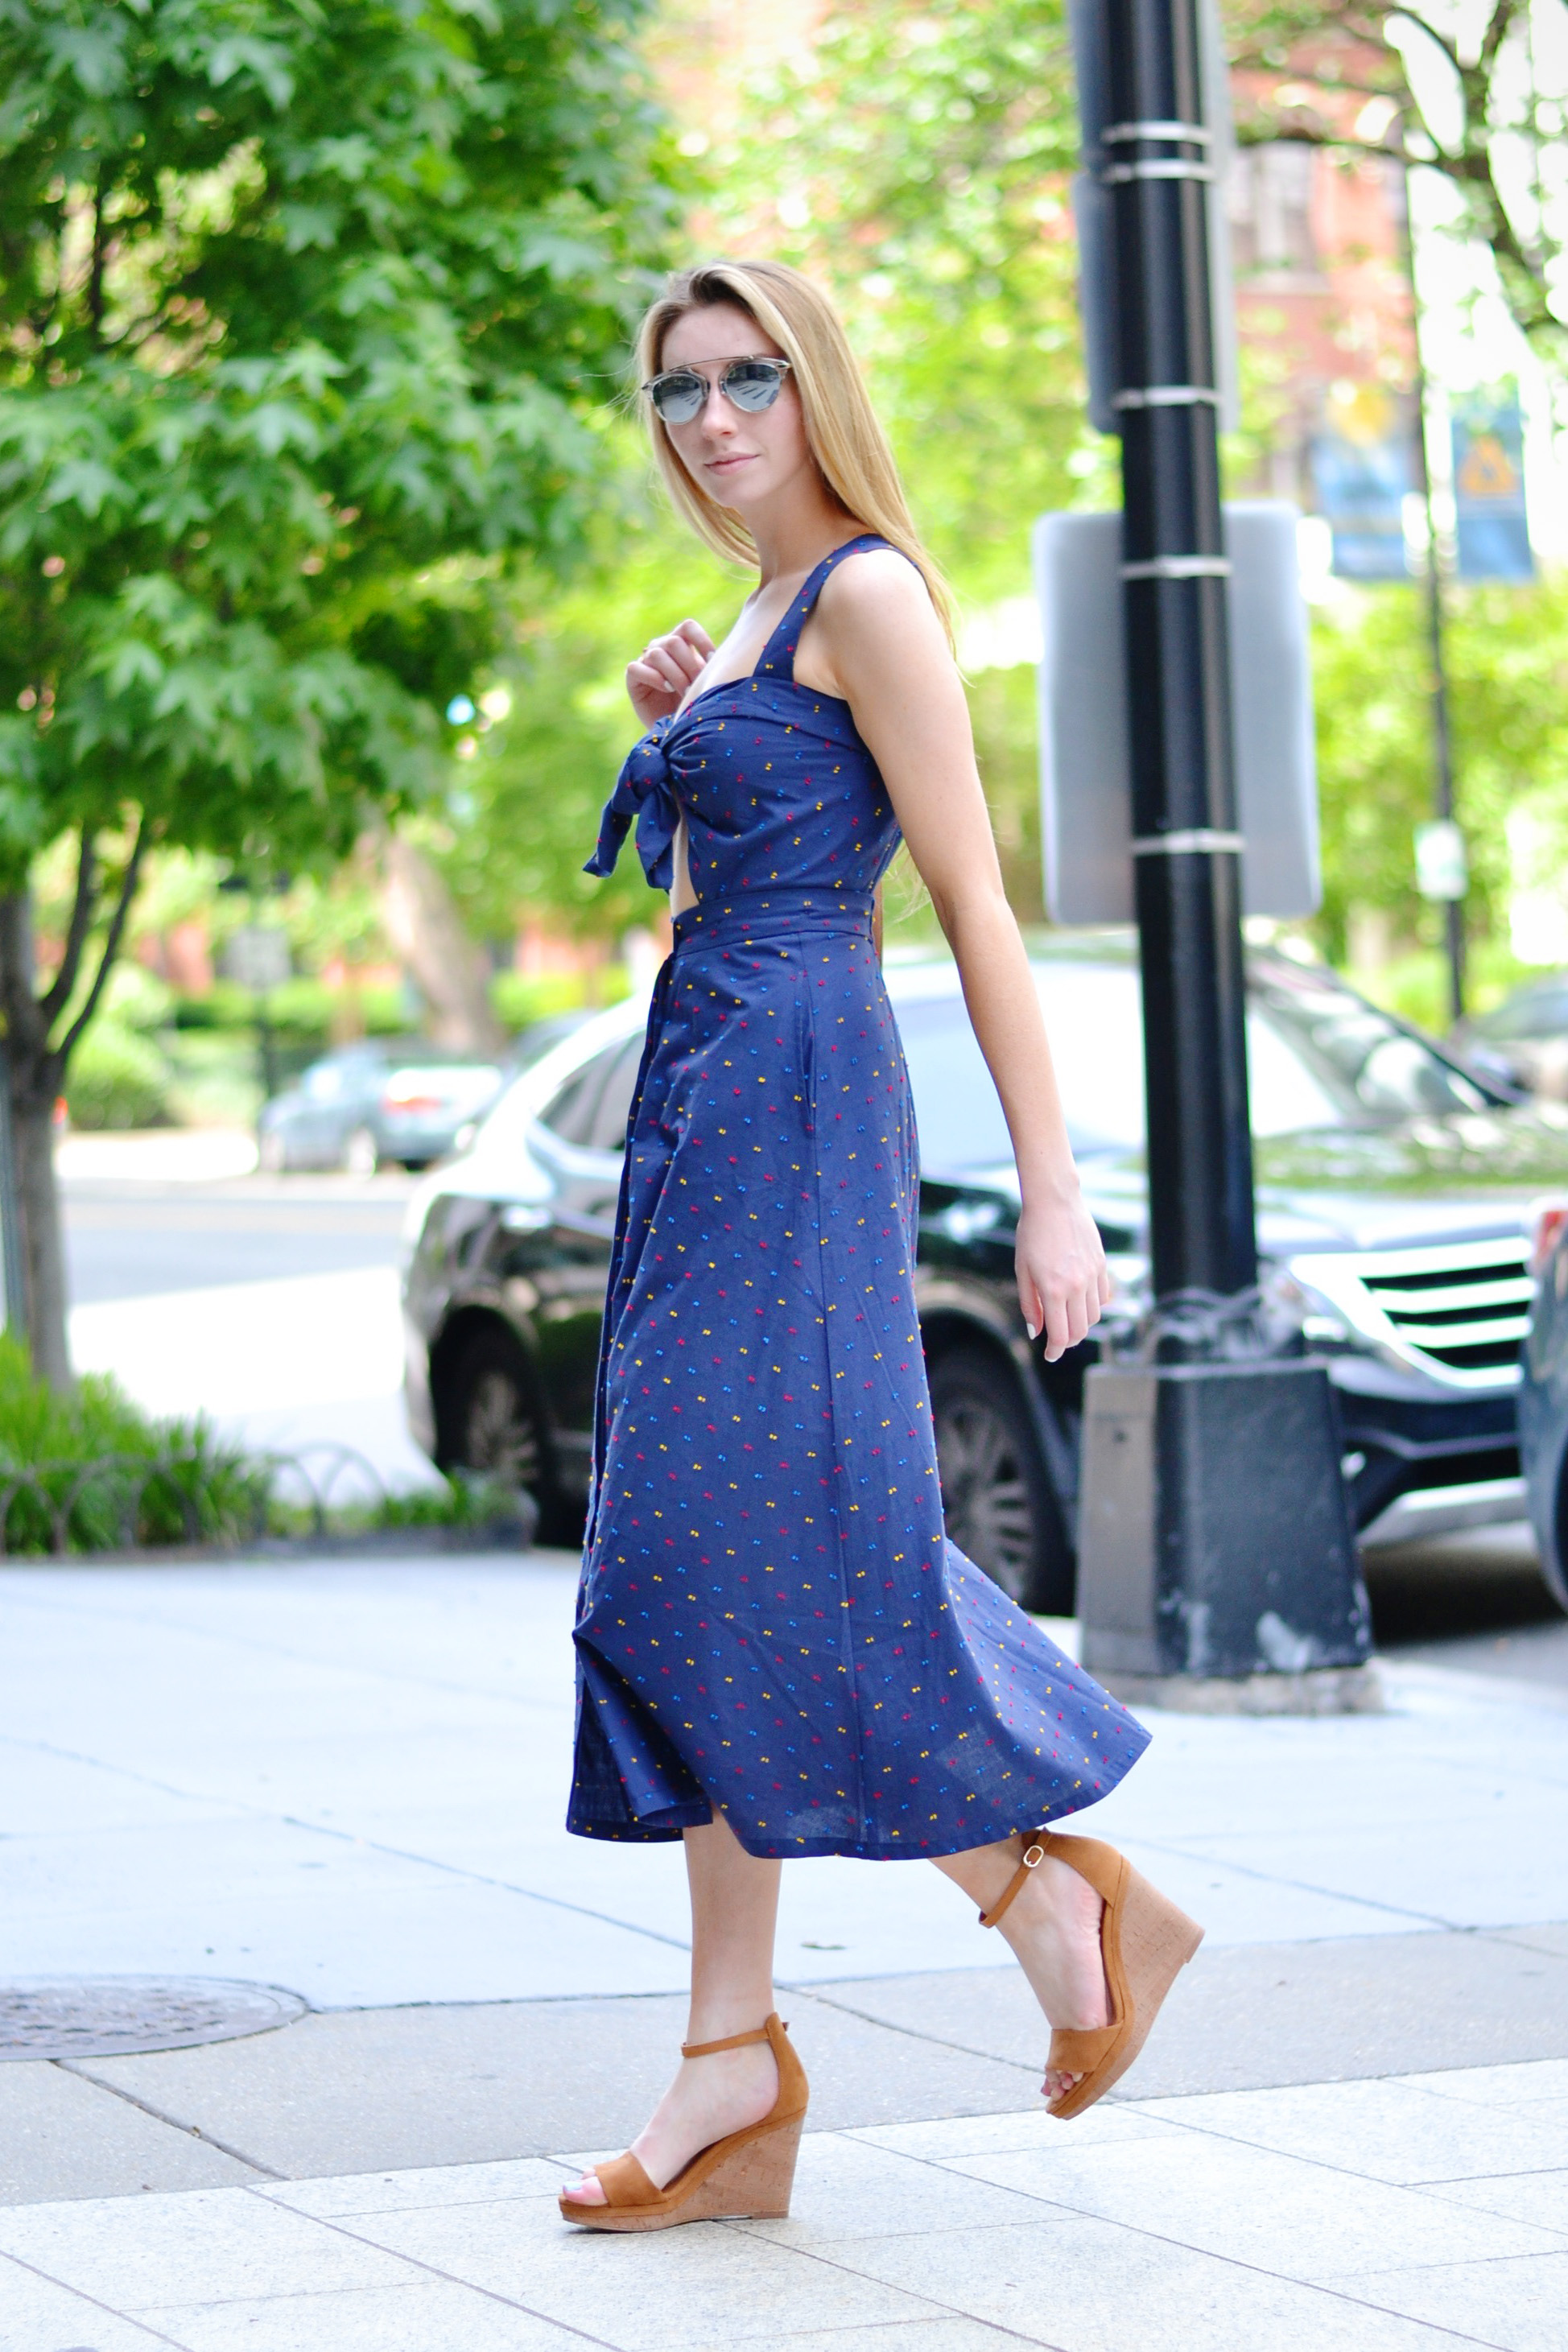 h and m navy dress